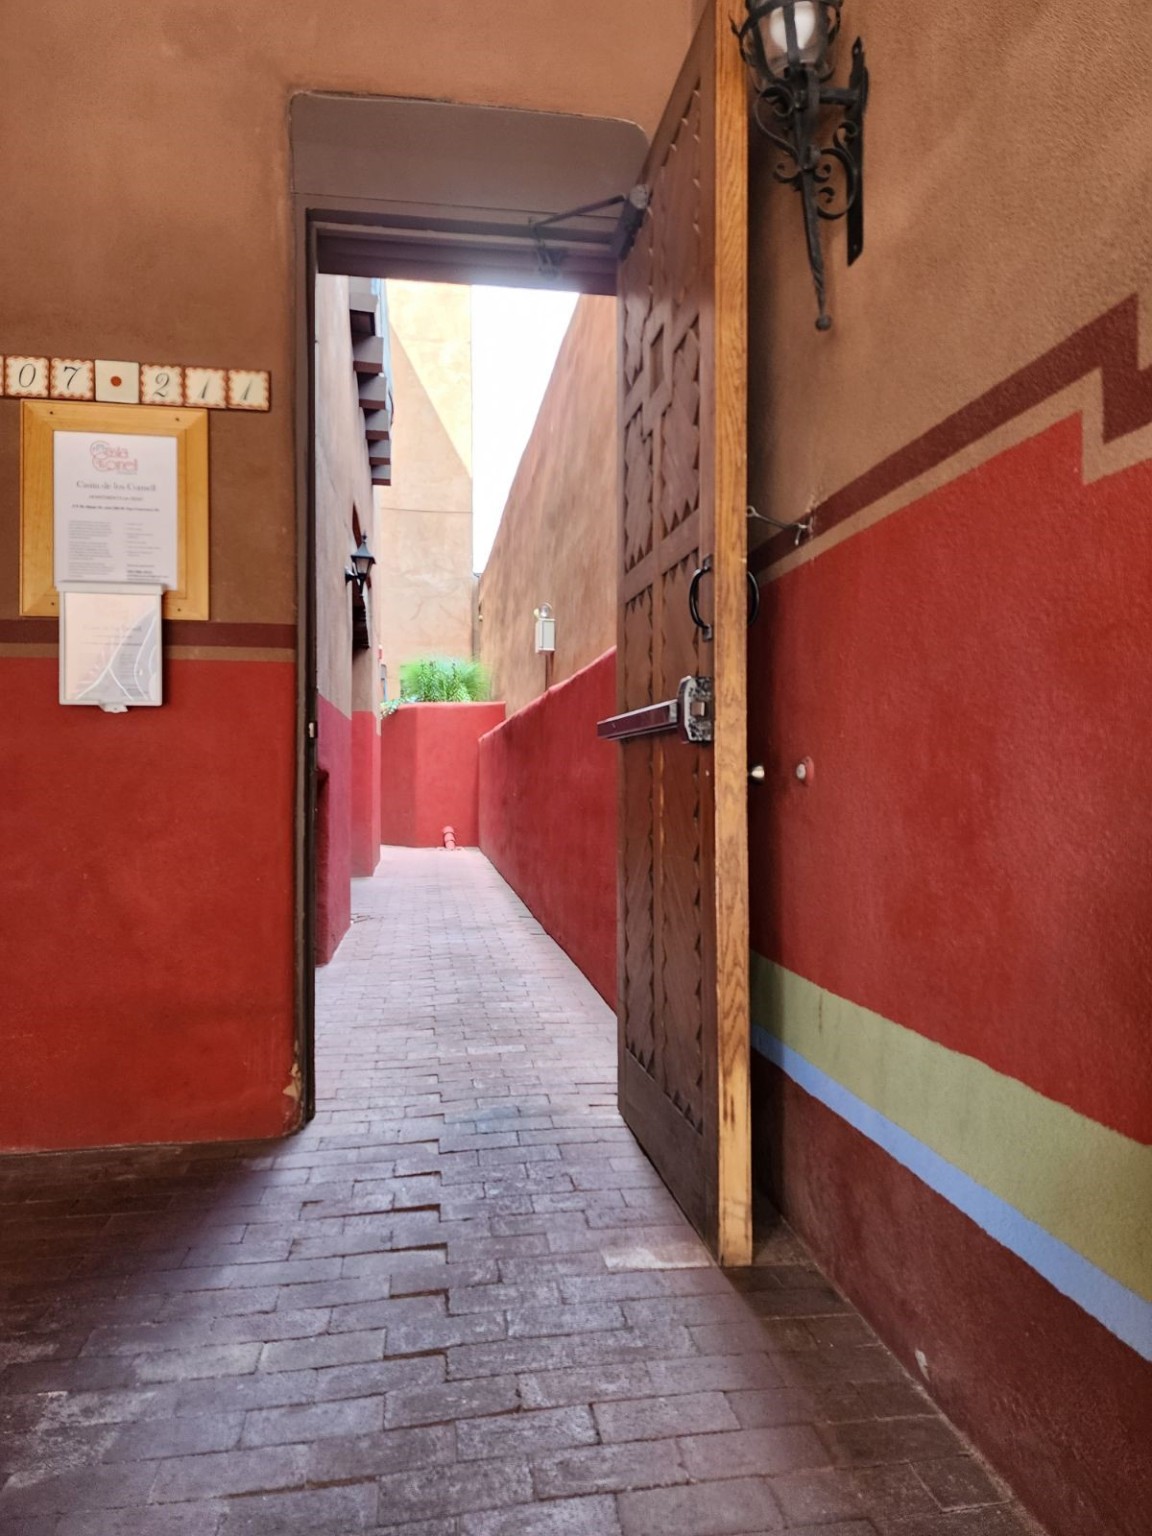 203 W Water Street, Santa Fe, New Mexico 87501, ,Commercial Sale,For Sale,203 W Water Street,202339076